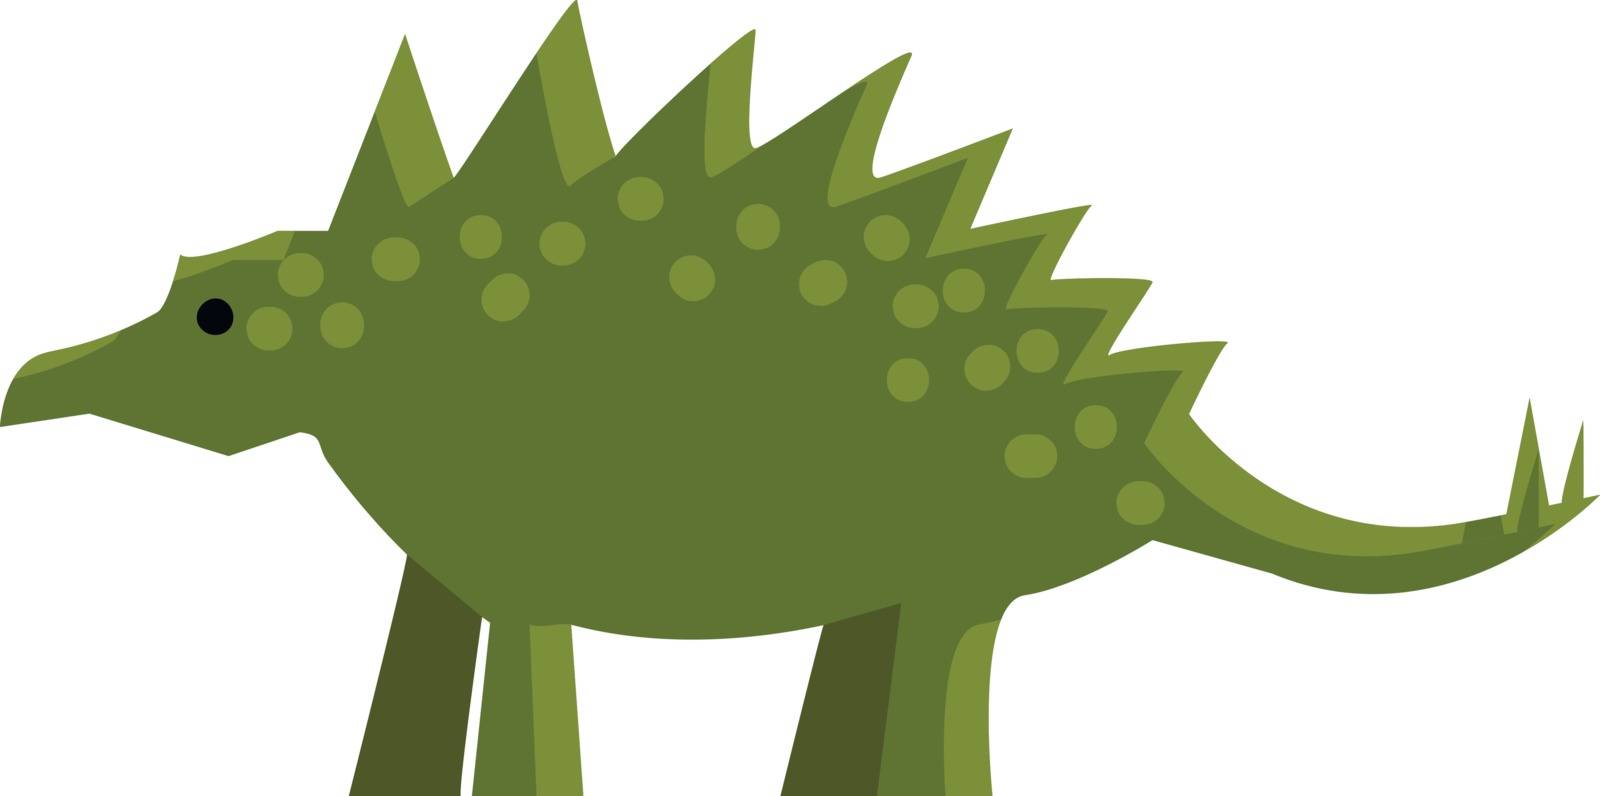 An ancient green dinosaur with spikes on its back and tail vector color drawing or illustration 